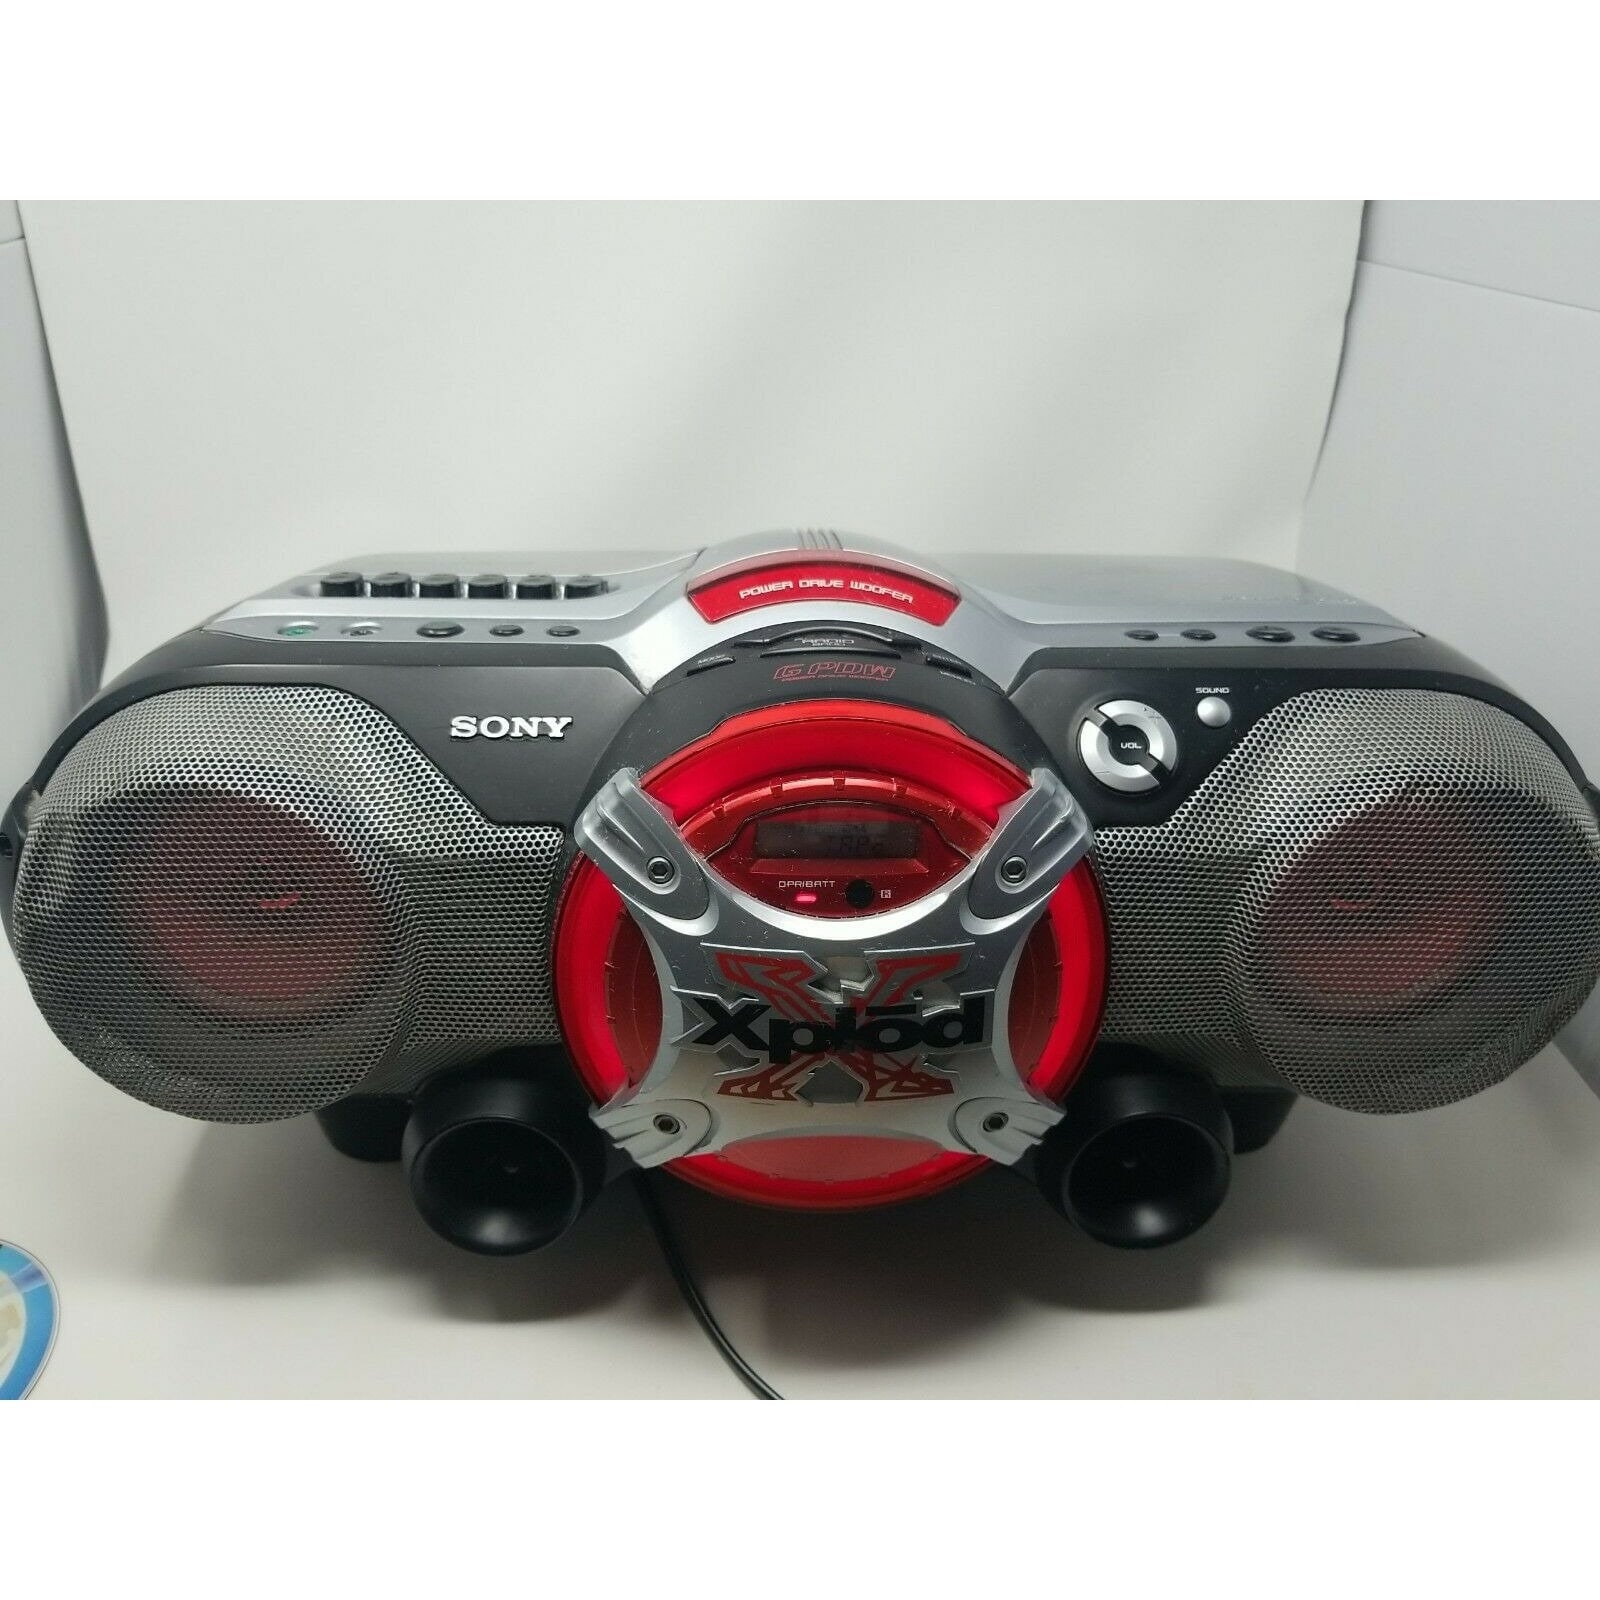 Sony CFD-E75 CD/Radio/Cassette Boombox for sale online